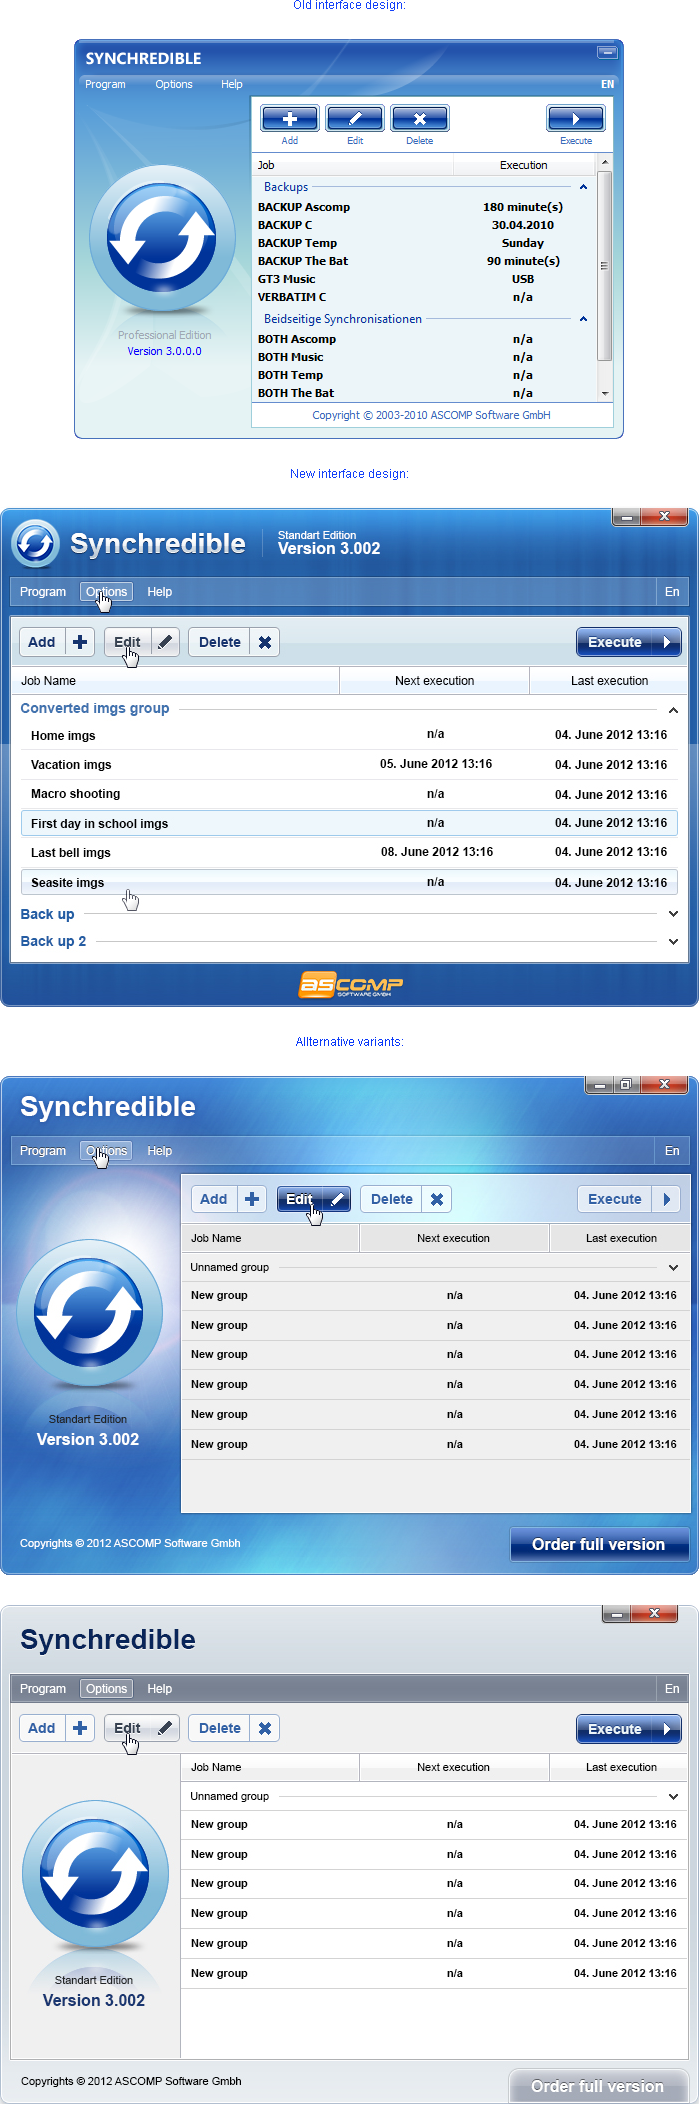 Interface redesign for Synchredible